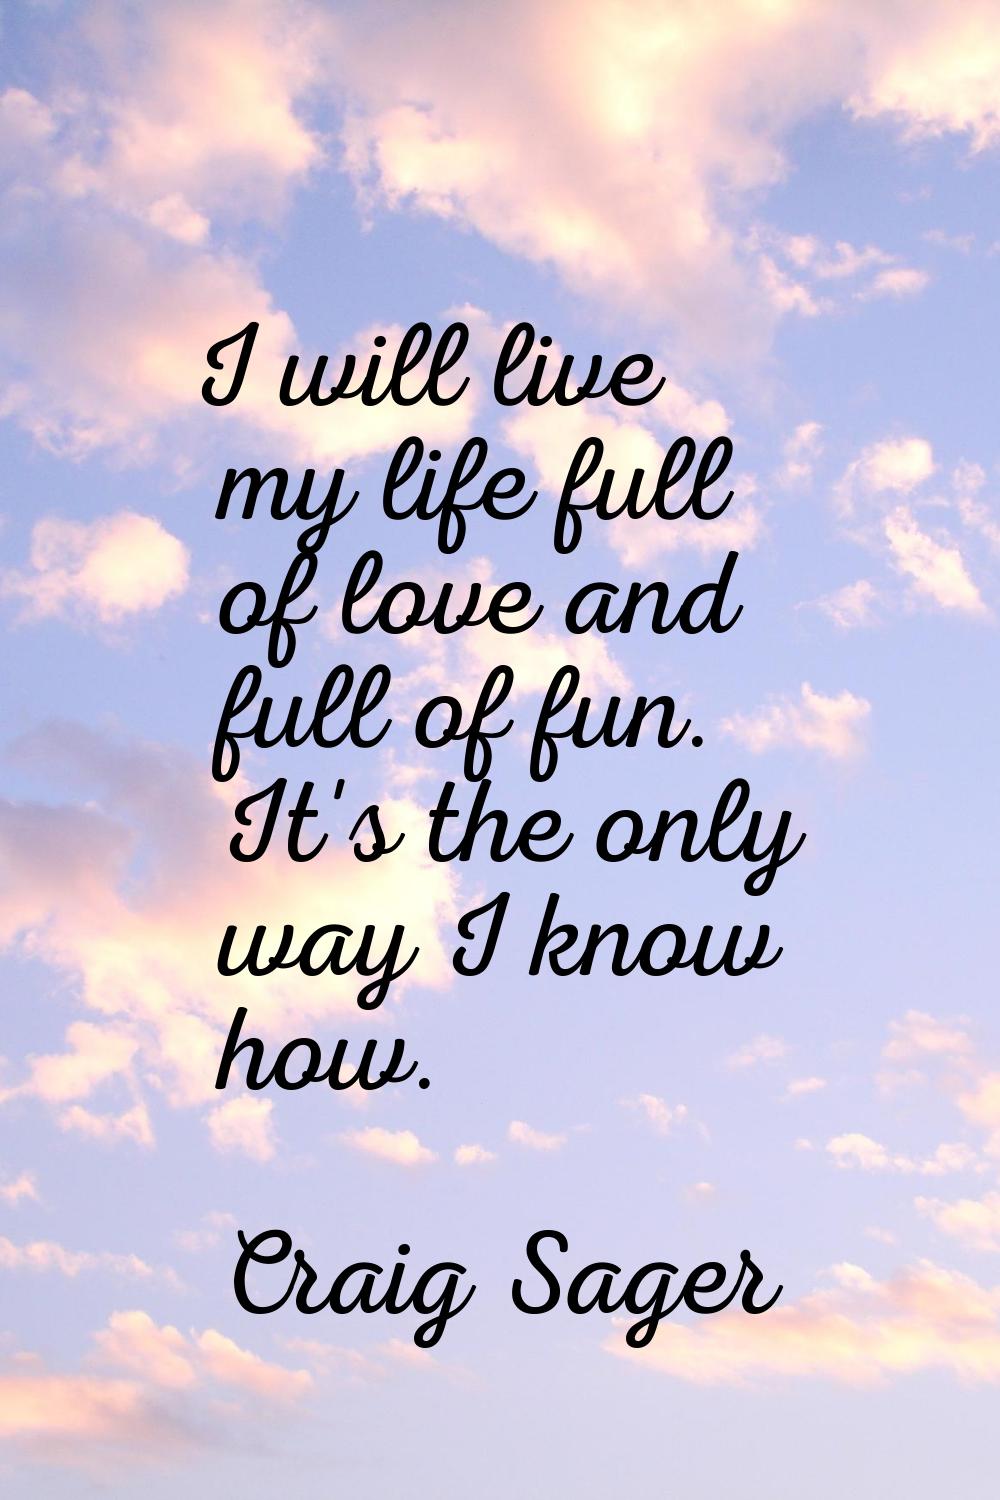 I will live my life full of love and full of fun. It's the only way I know how.